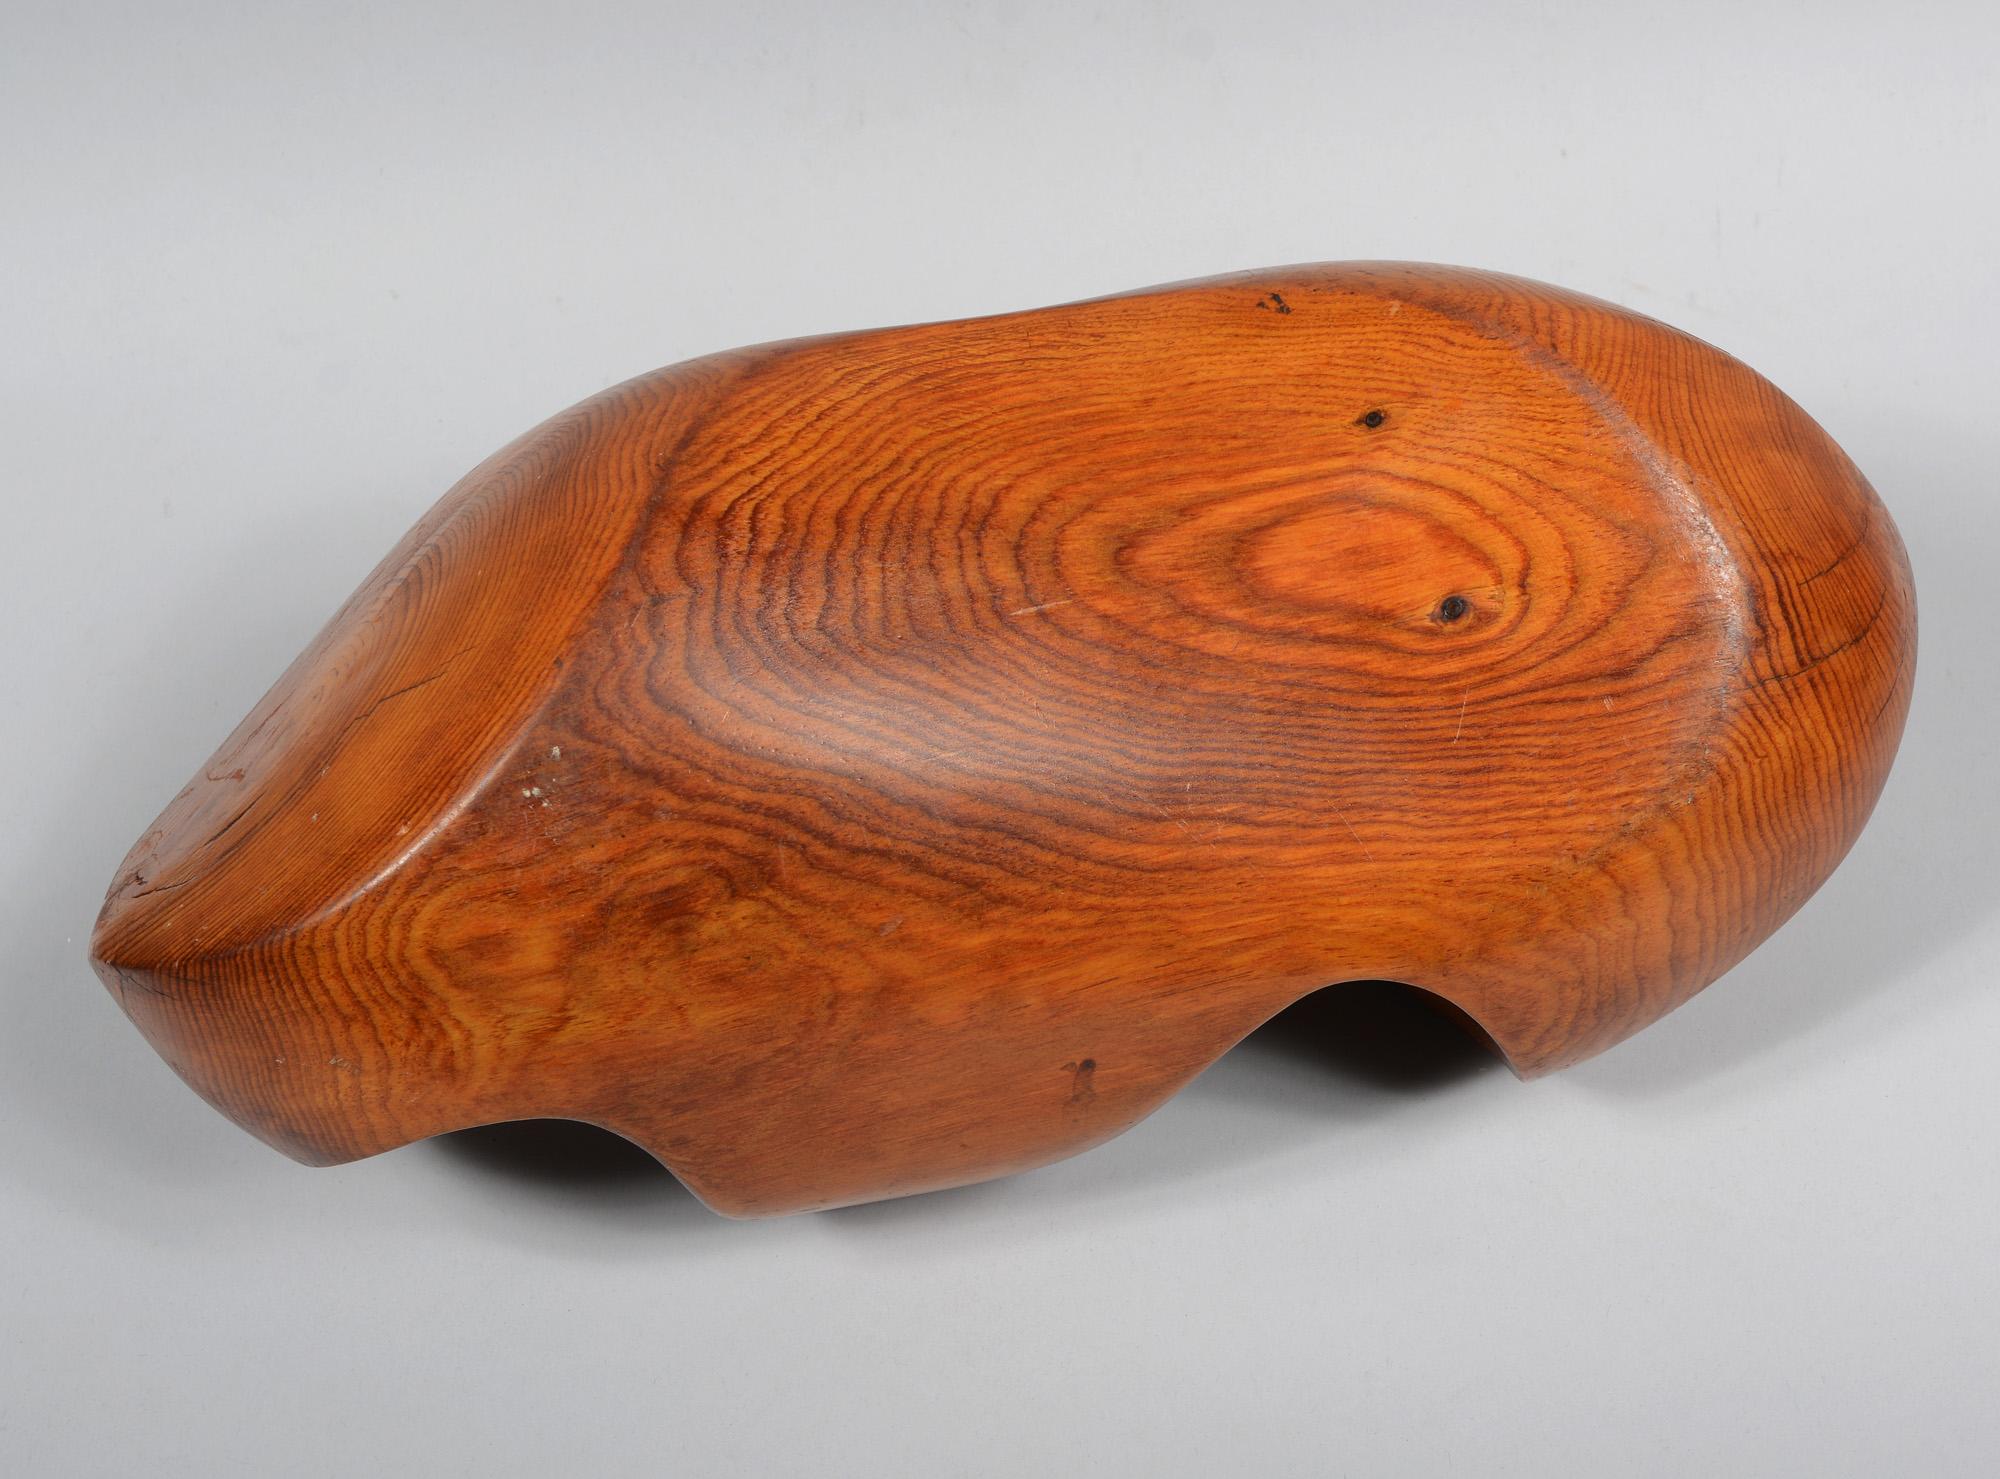 Abstract Carved Wood Table Top Sculpture 3